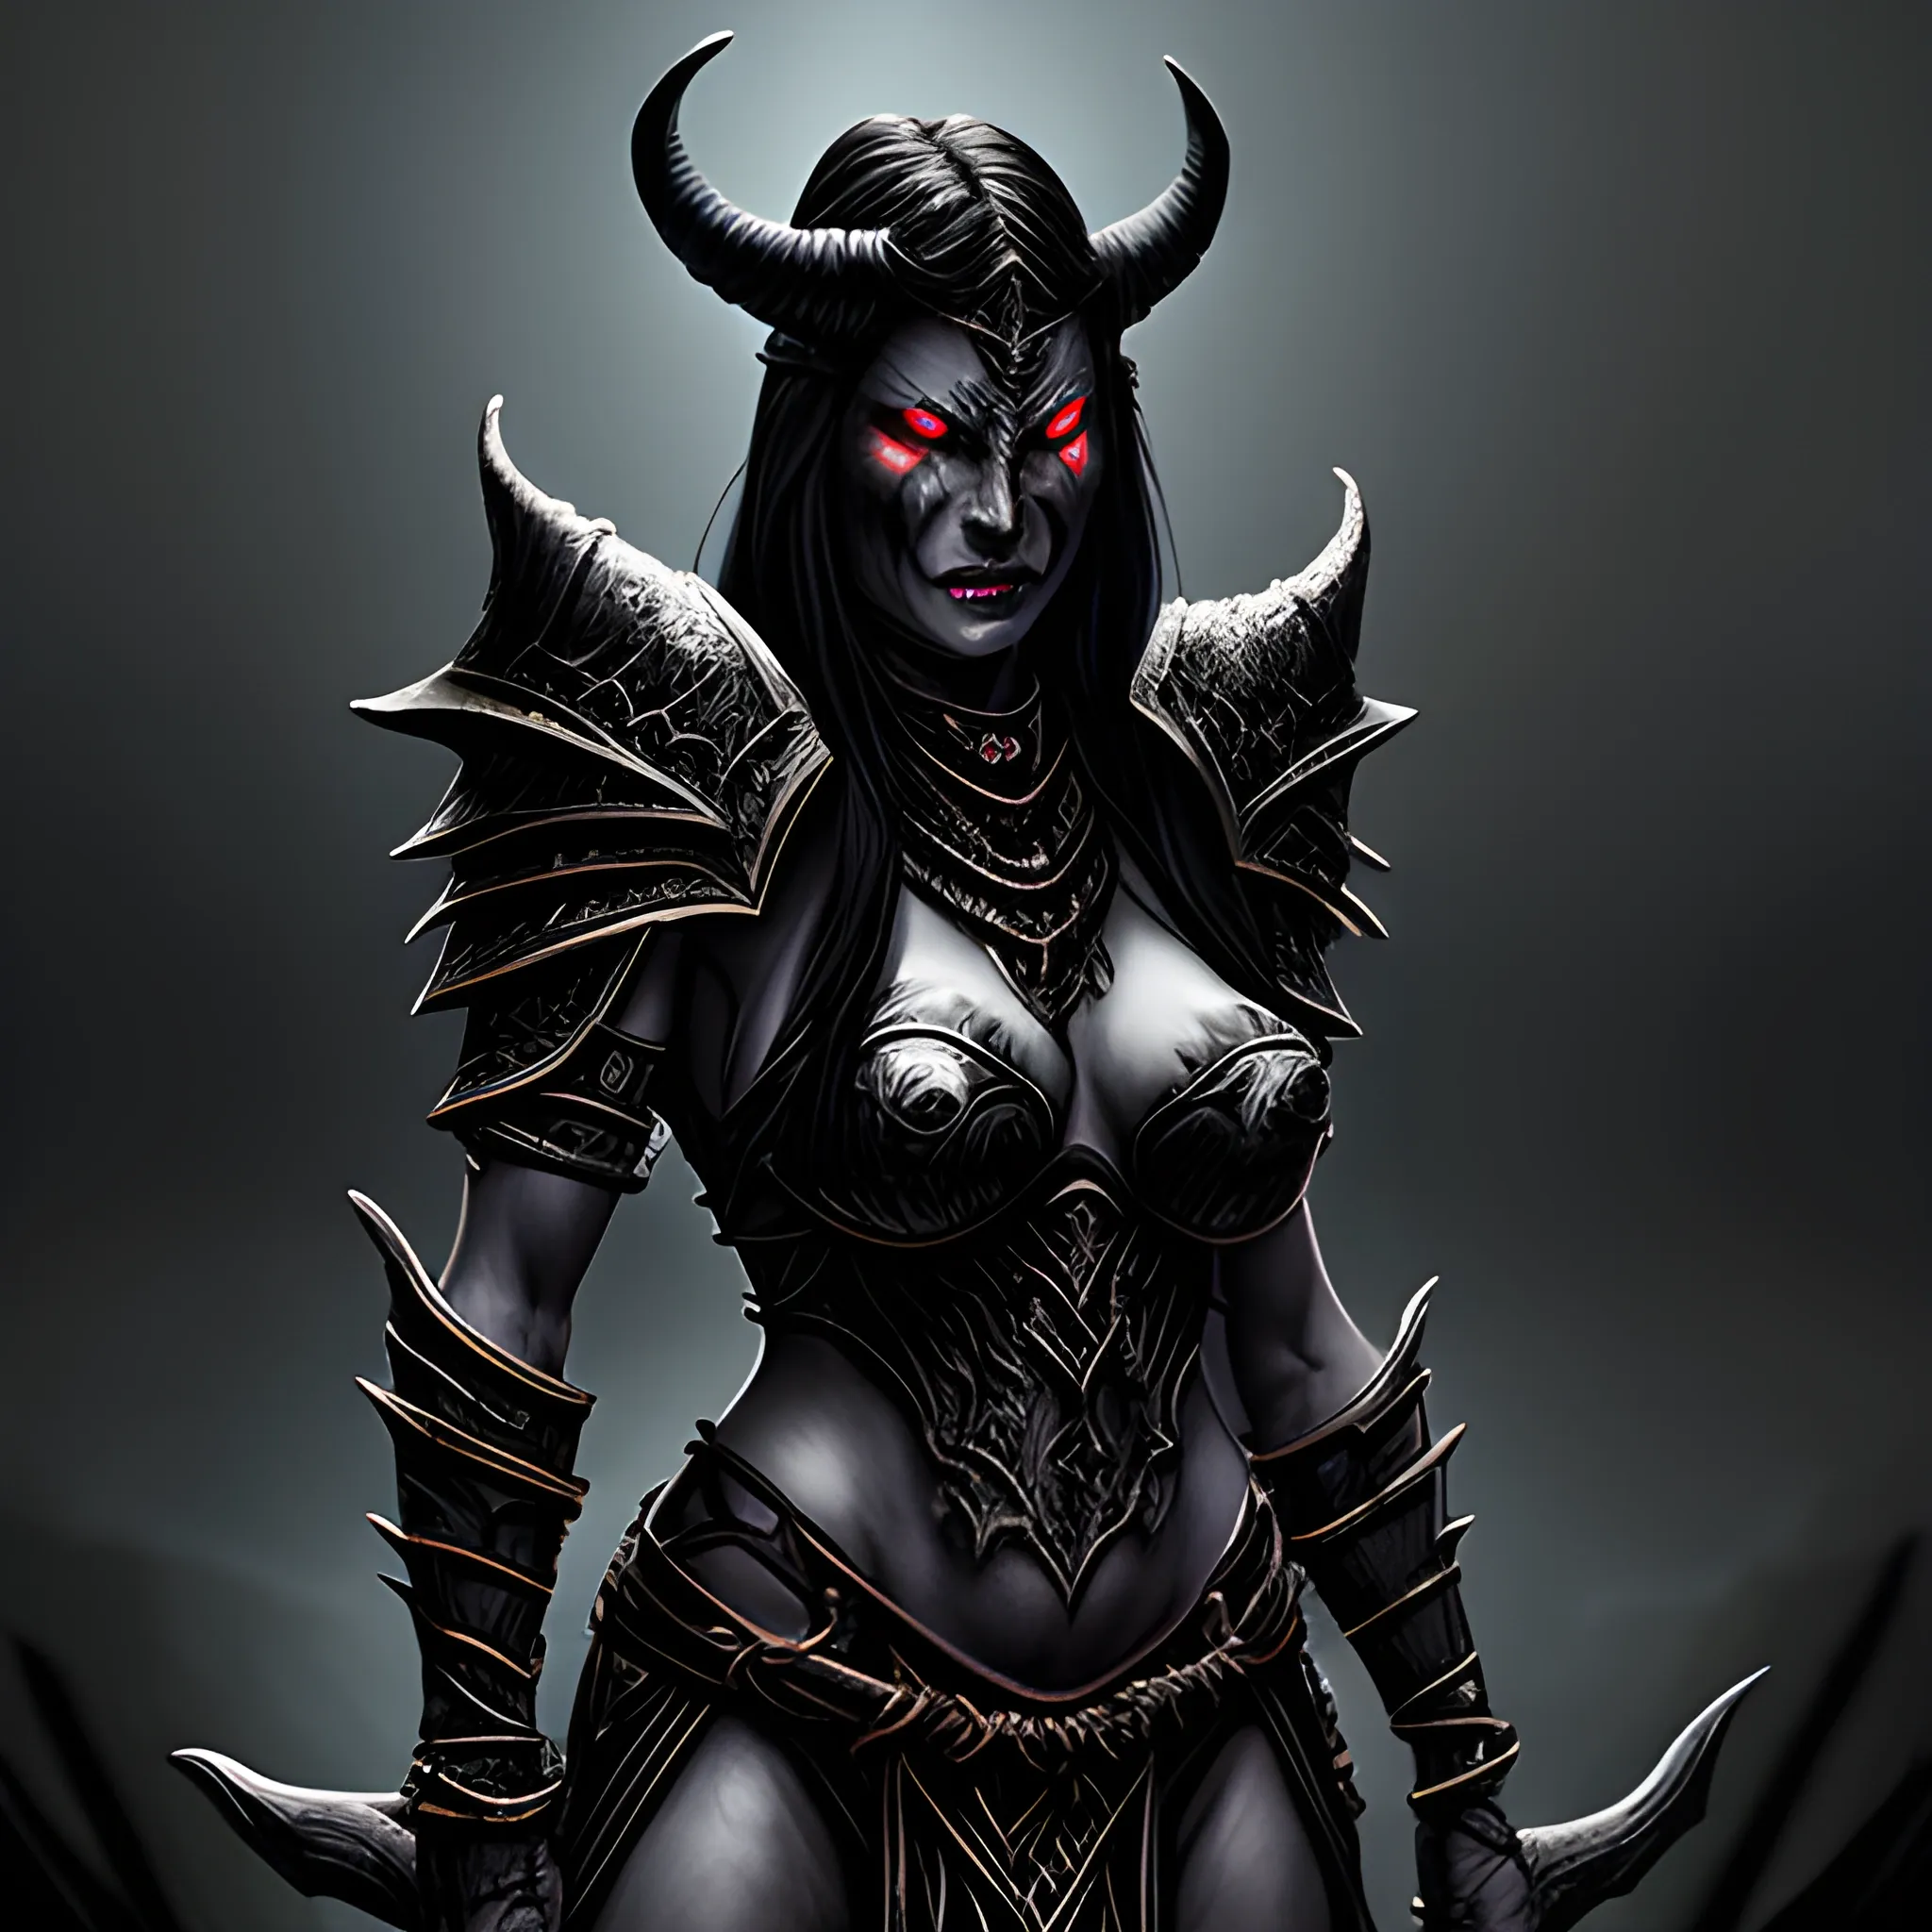 high definition, high fantasy D&D, intimidating female demon 
with glowing eyes, in black warrior armor